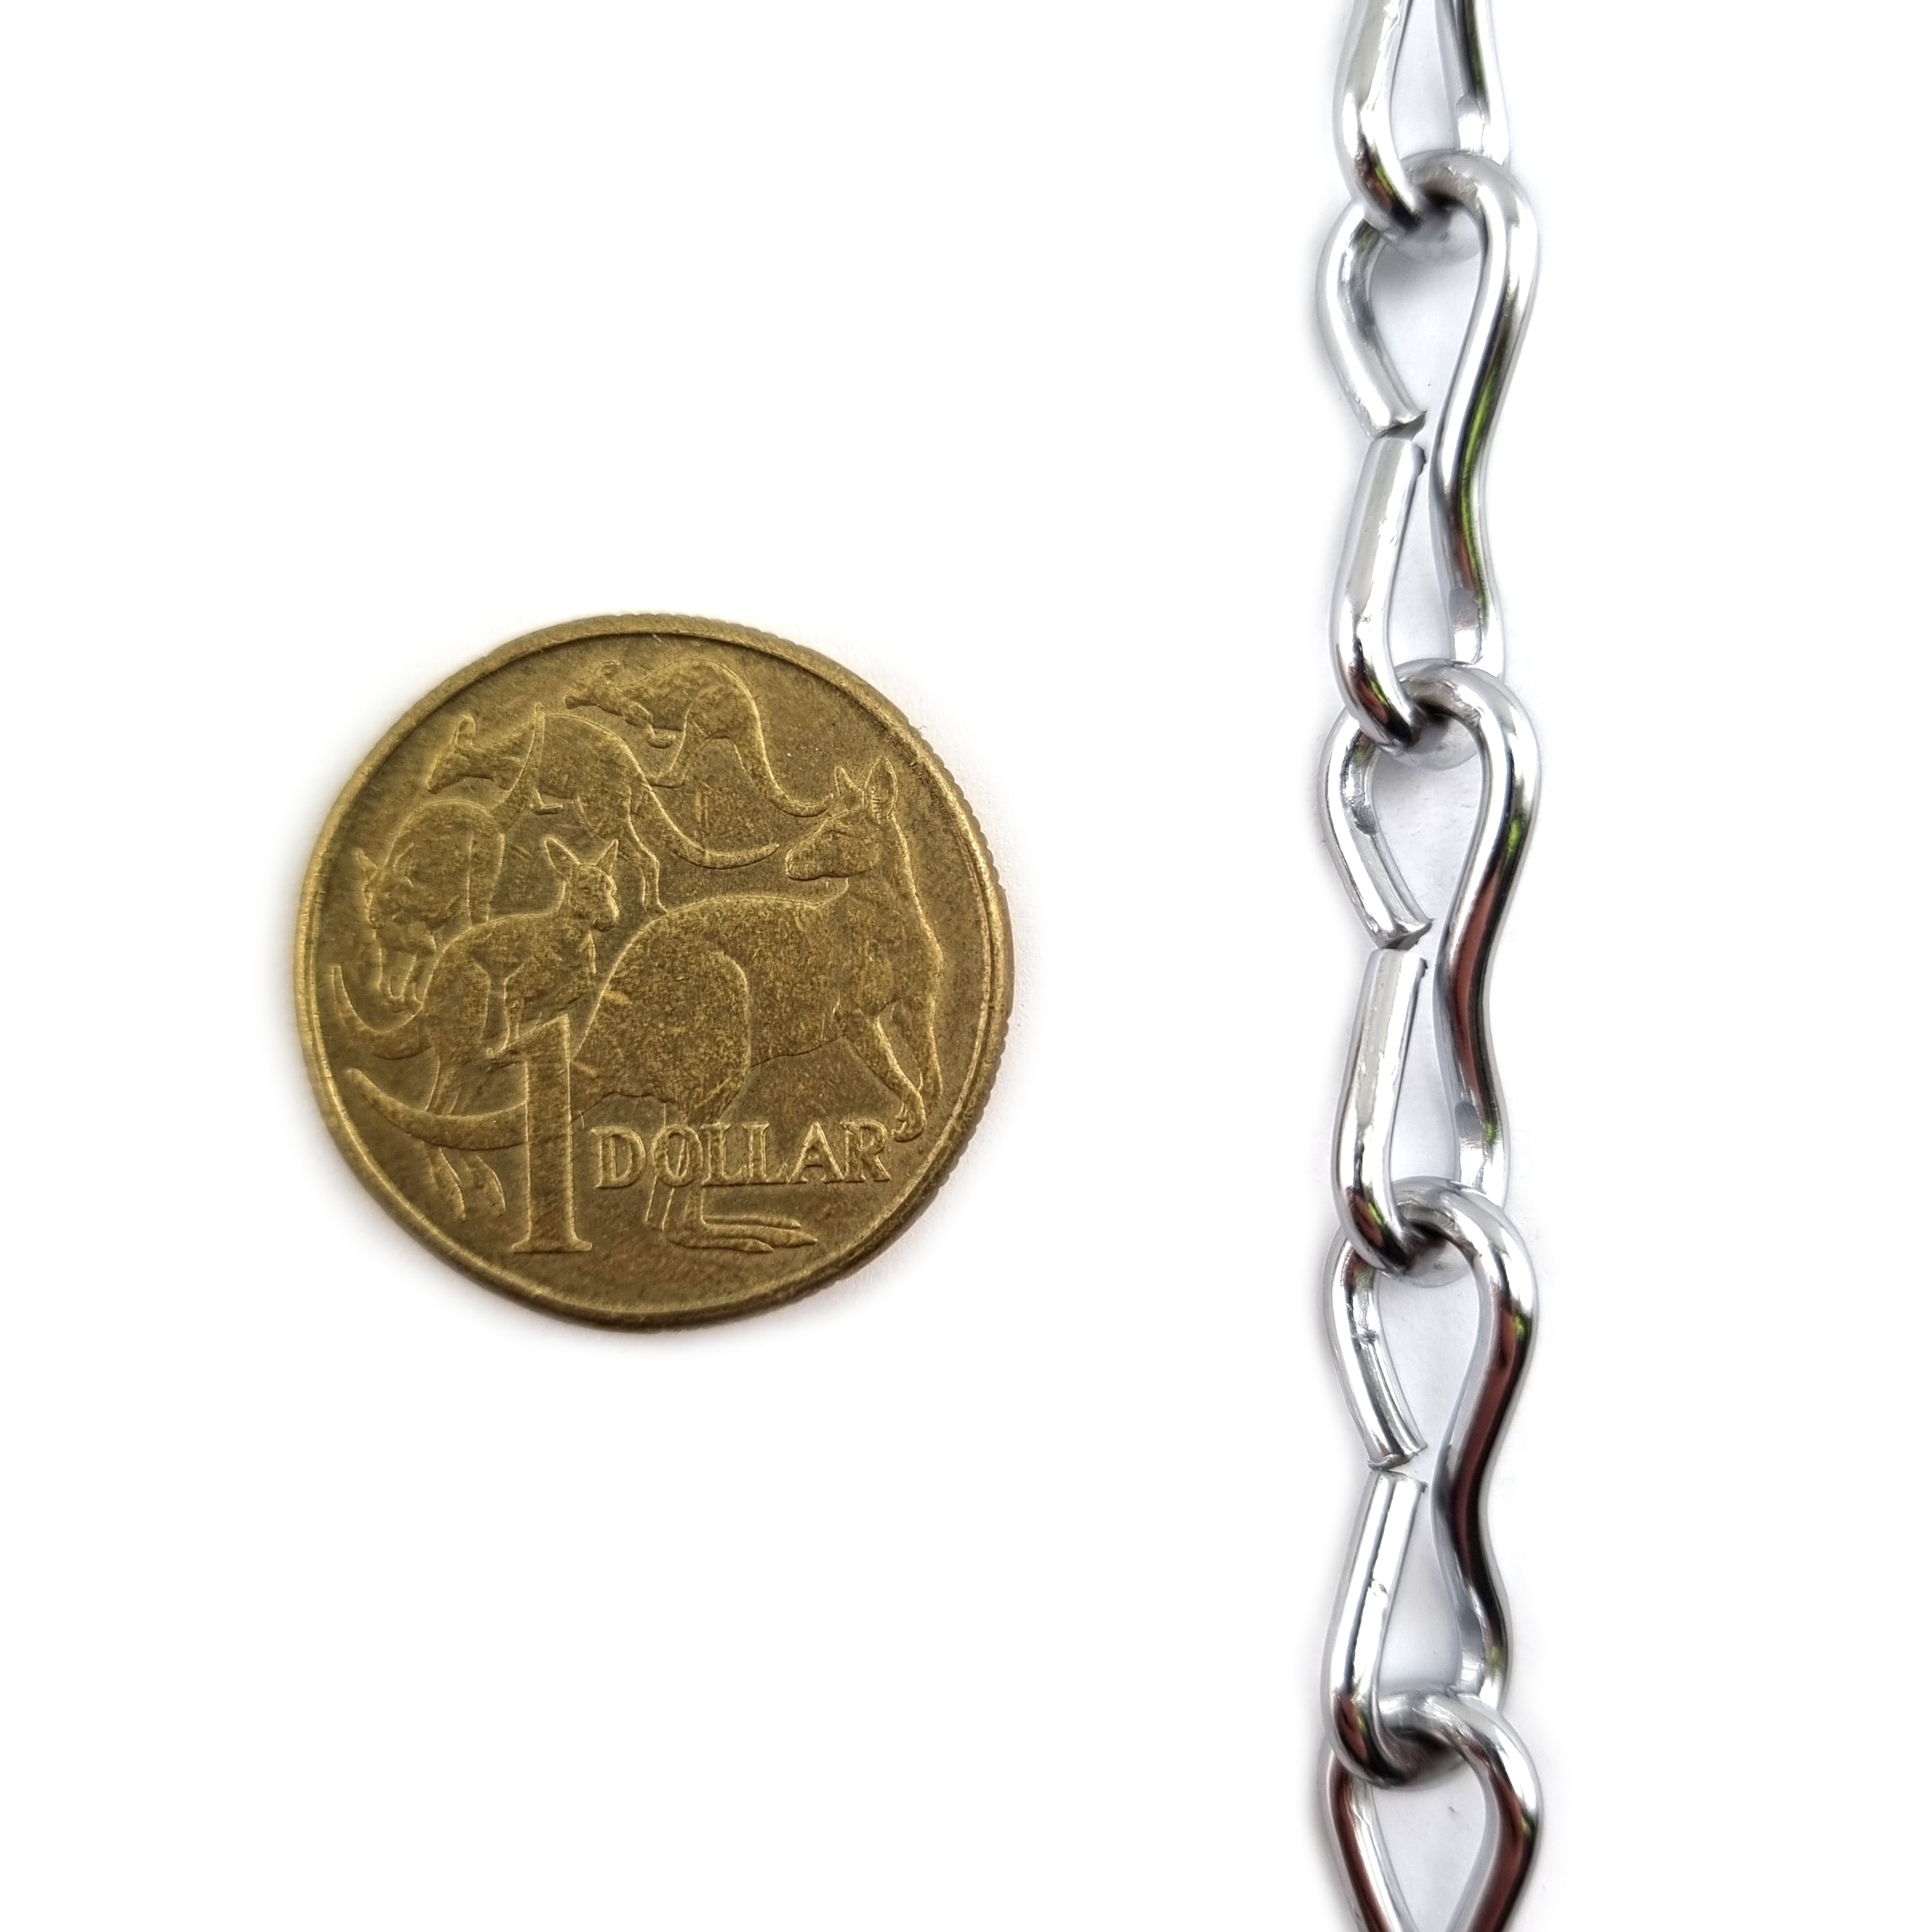 Single jack chain in a high polished chrome plated finish, size 2mm. Order by the metre with a minimum order of 1 metre.